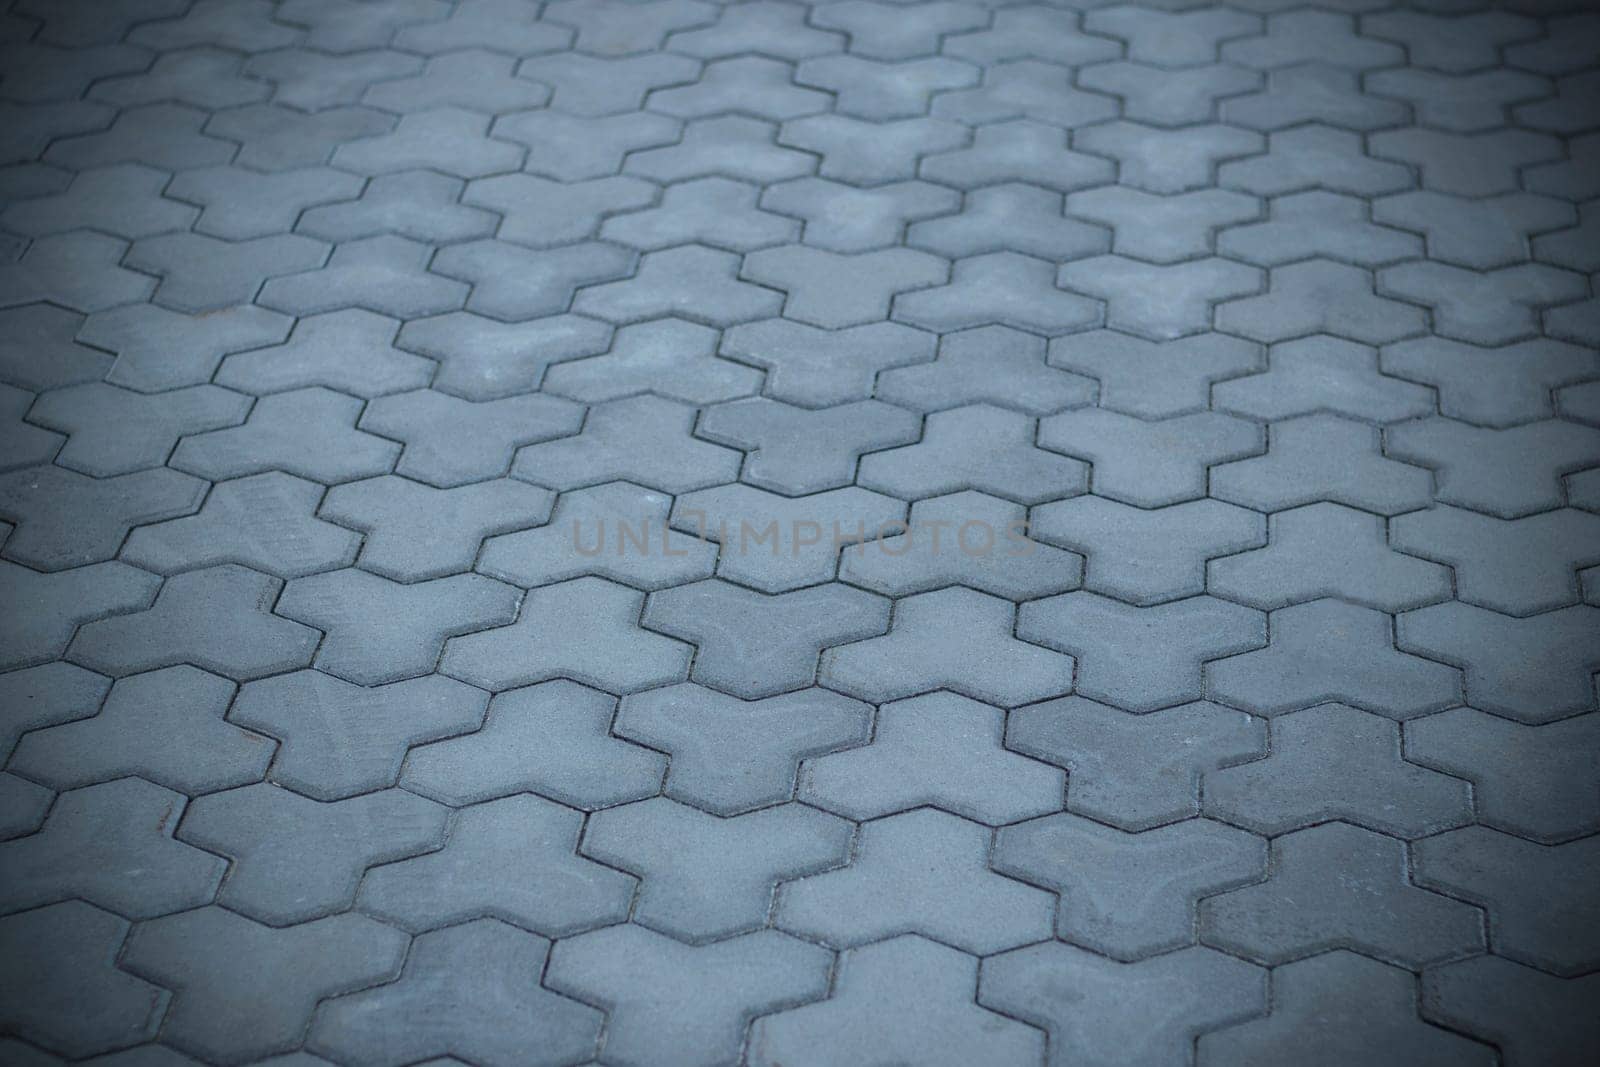 Concrete or cobble gray pavement slabs or stones for floor, wall or path. Traditional fence, court, backyard or road paving. Abstract background - gray paving slabs in the form of squares.